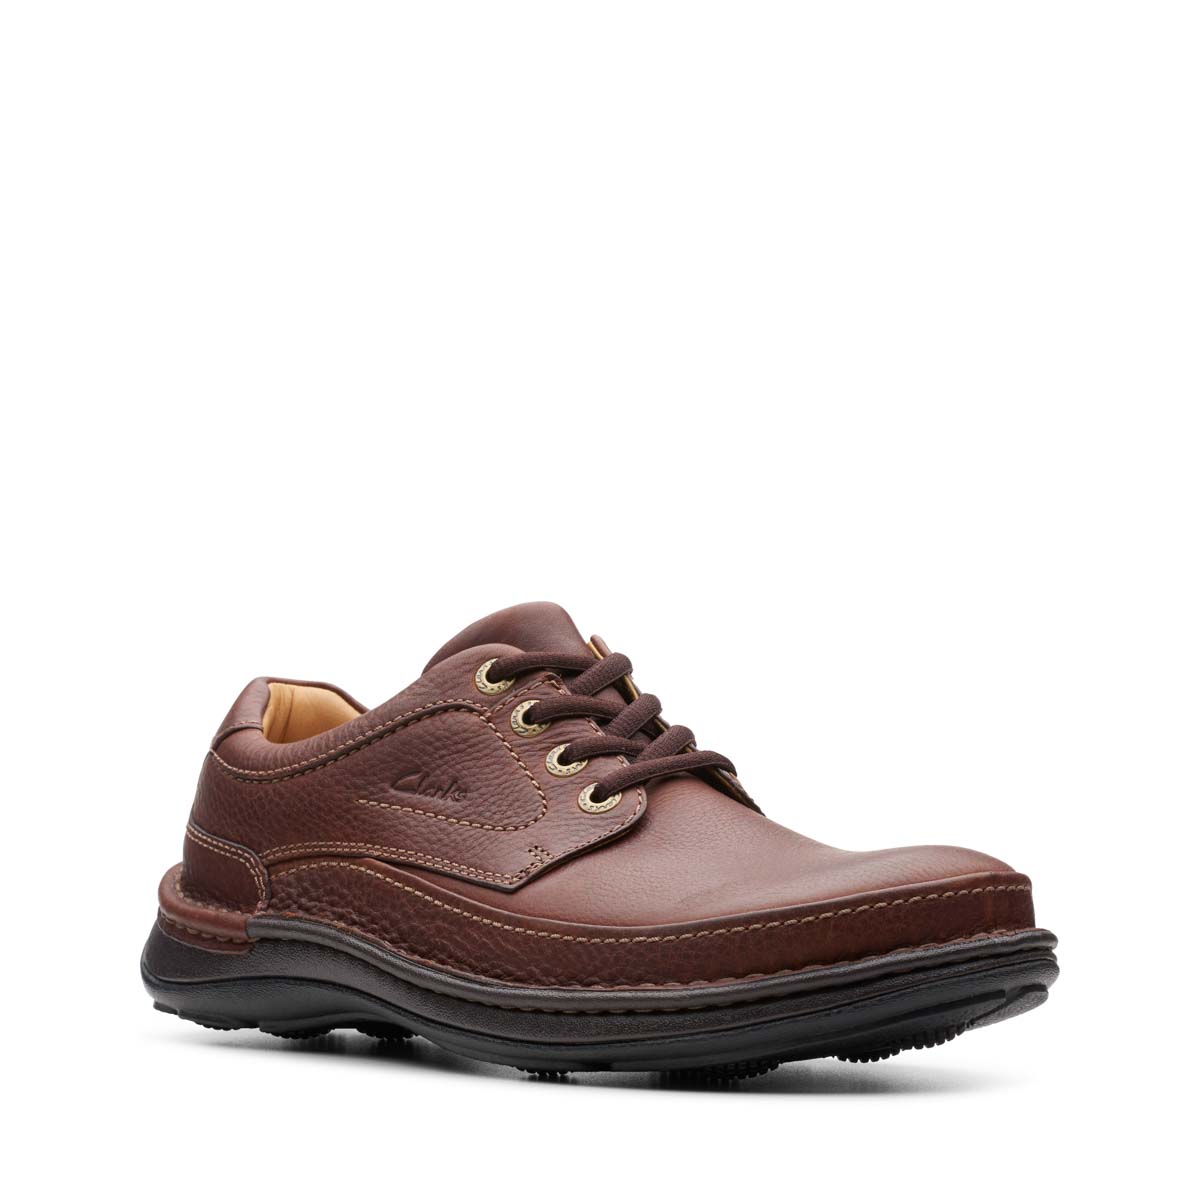 Clarks Nature Three Brown leather Mens comfort shoes 3900-58H in a Plain Leather in Size 8